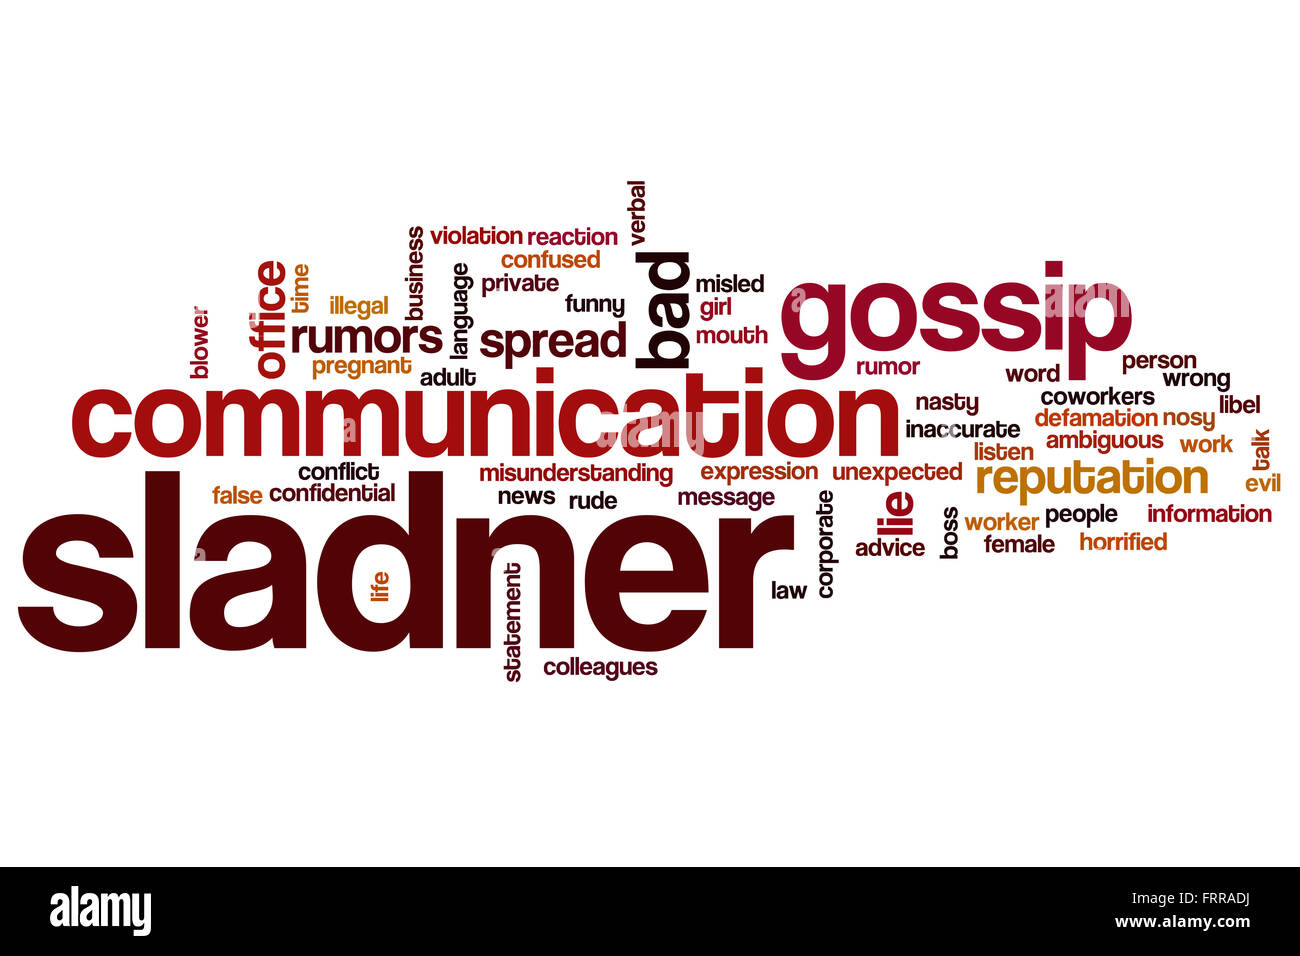 Slander word cloud concept with gossip news related tags Stock Photo